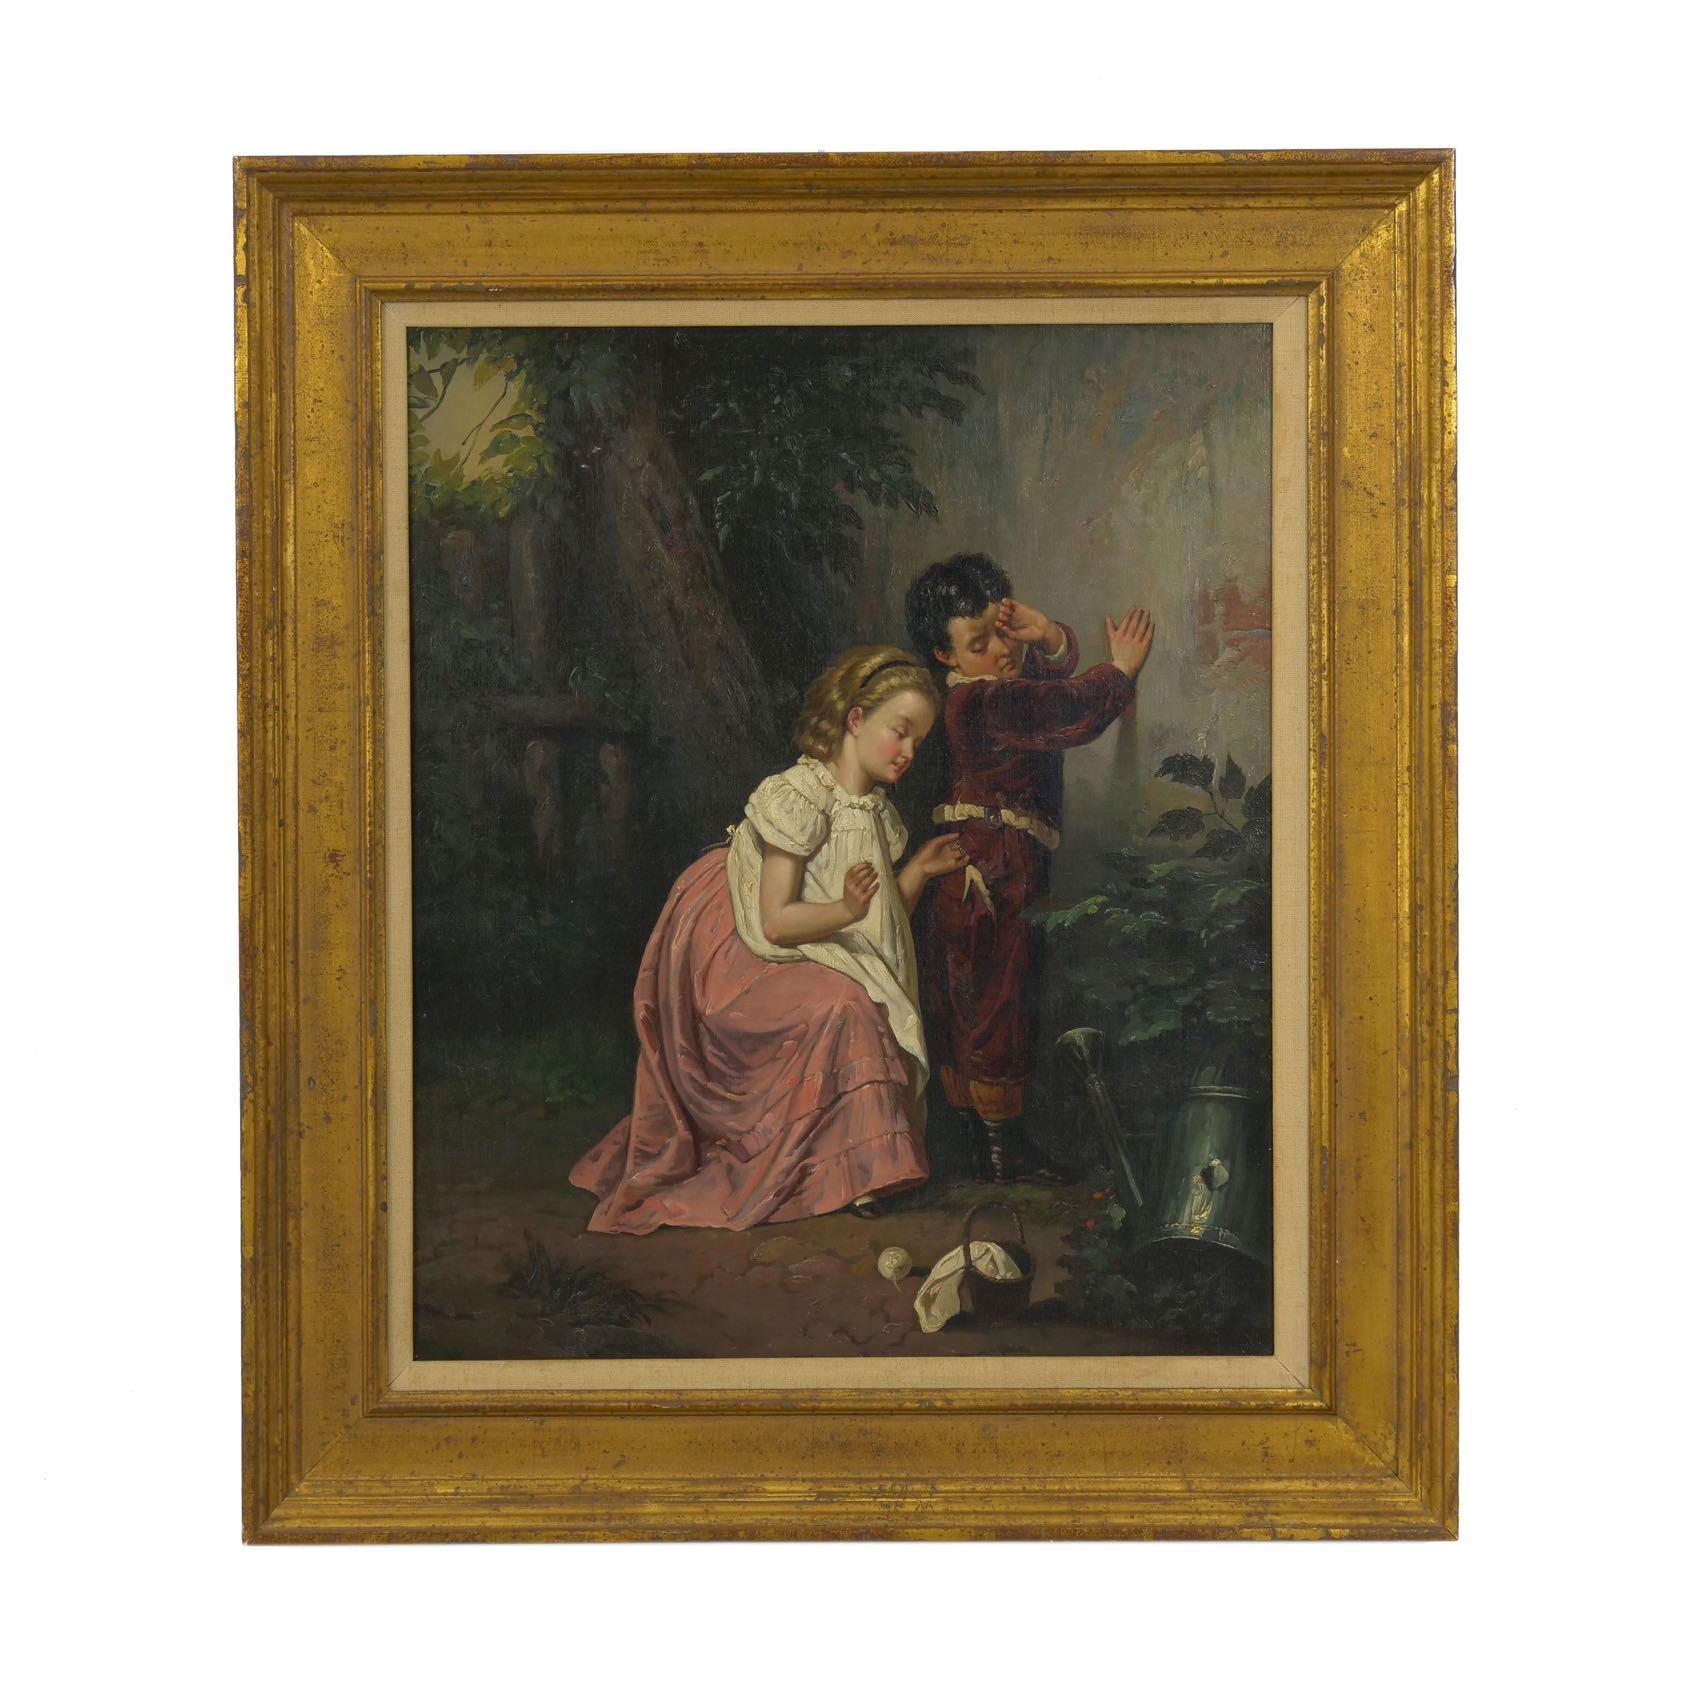 A charming little 19th century scene depicting an older sister taking care of her distressed younger brother, she kneels in her clean dress to get a good angle from which to sew his torn pants. The painting is unsigned and likely of British origin